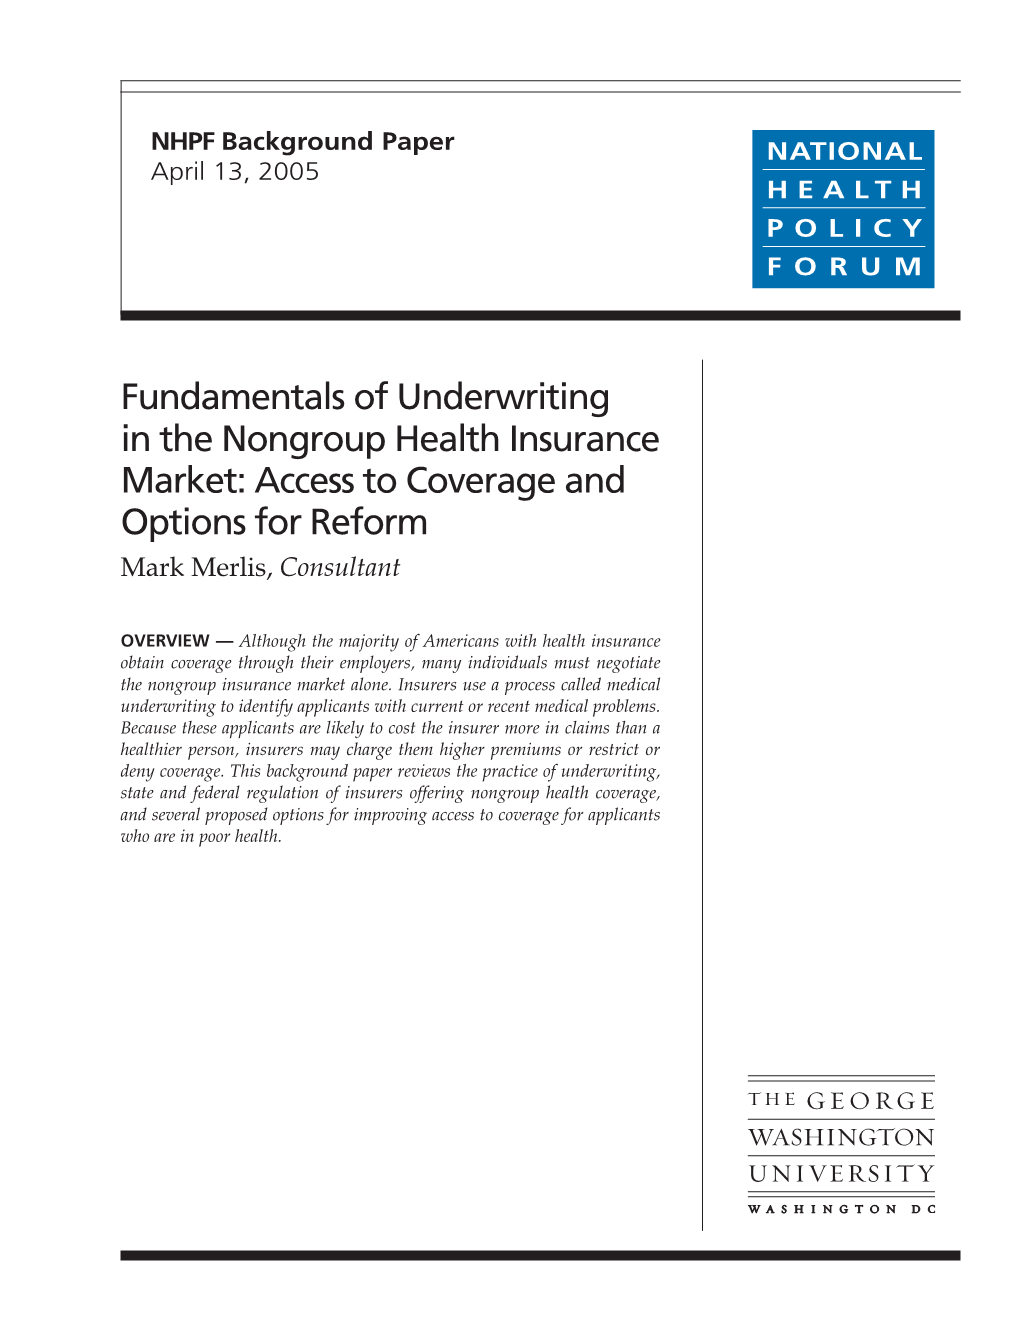 Fundamentals of Underwriting in the Nongroup Health Insurance Market: Access to Coverage and Options for Reform Mark Merlis, Consultant